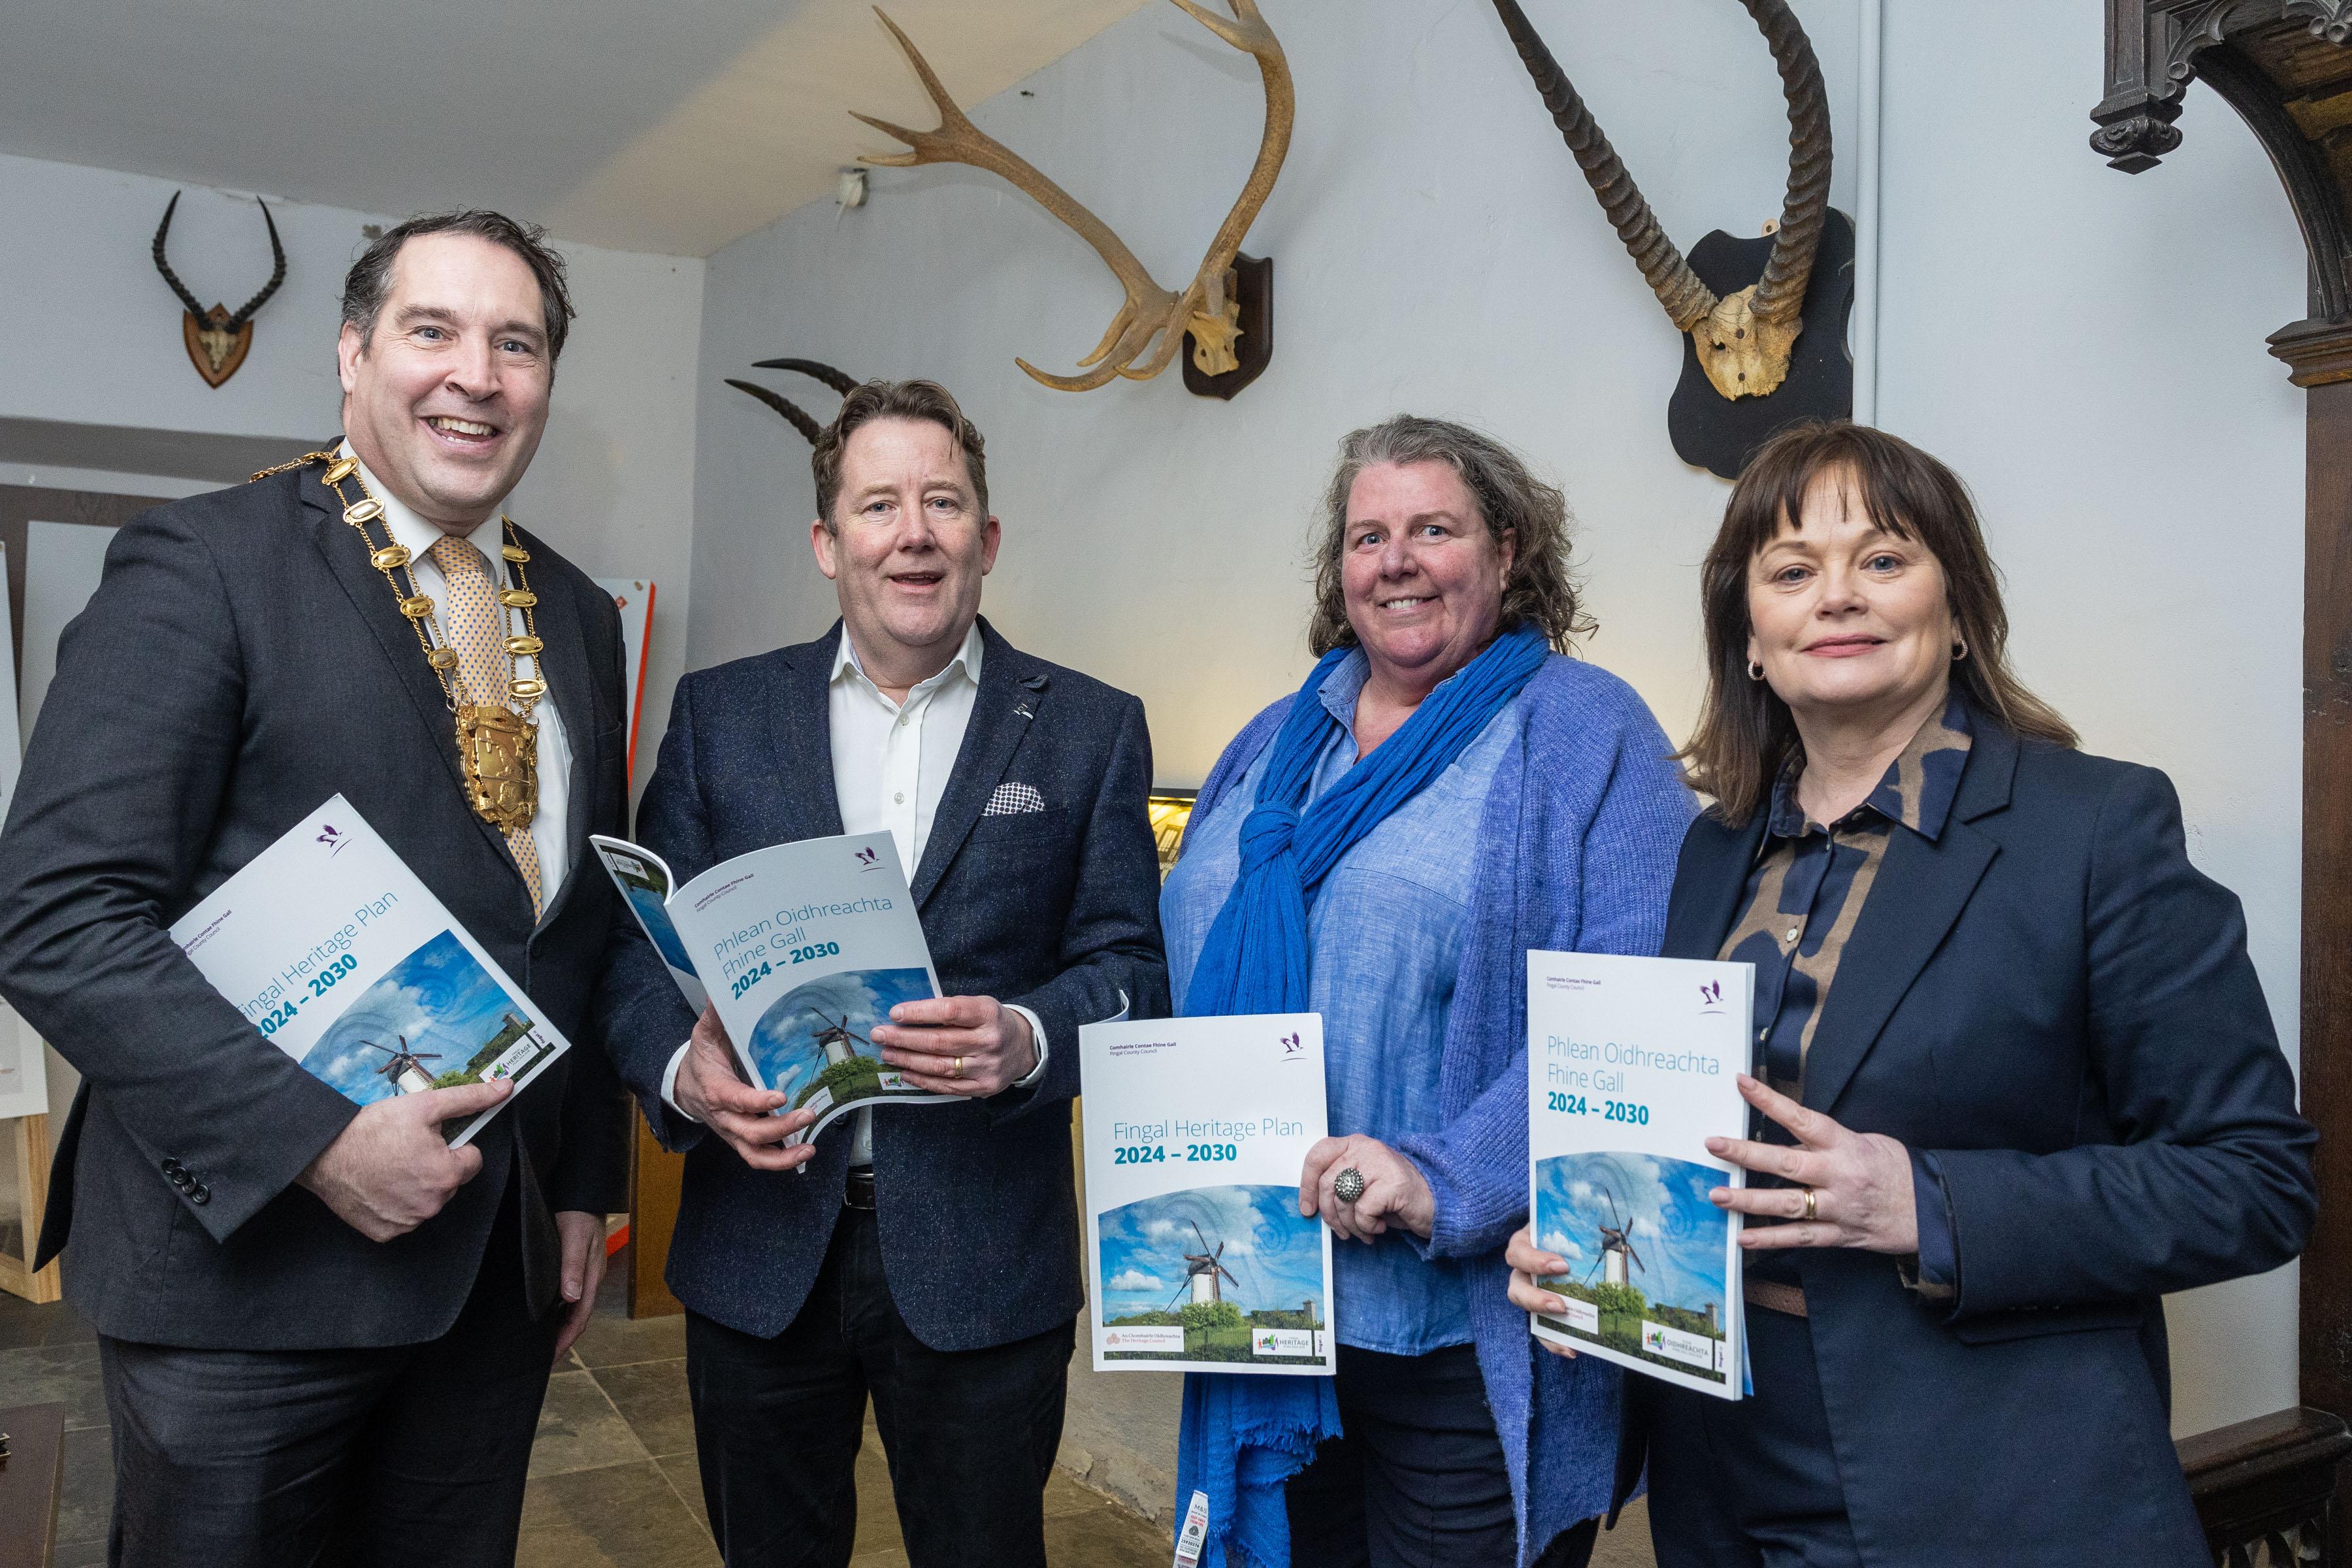 Launch of Heritage Plan